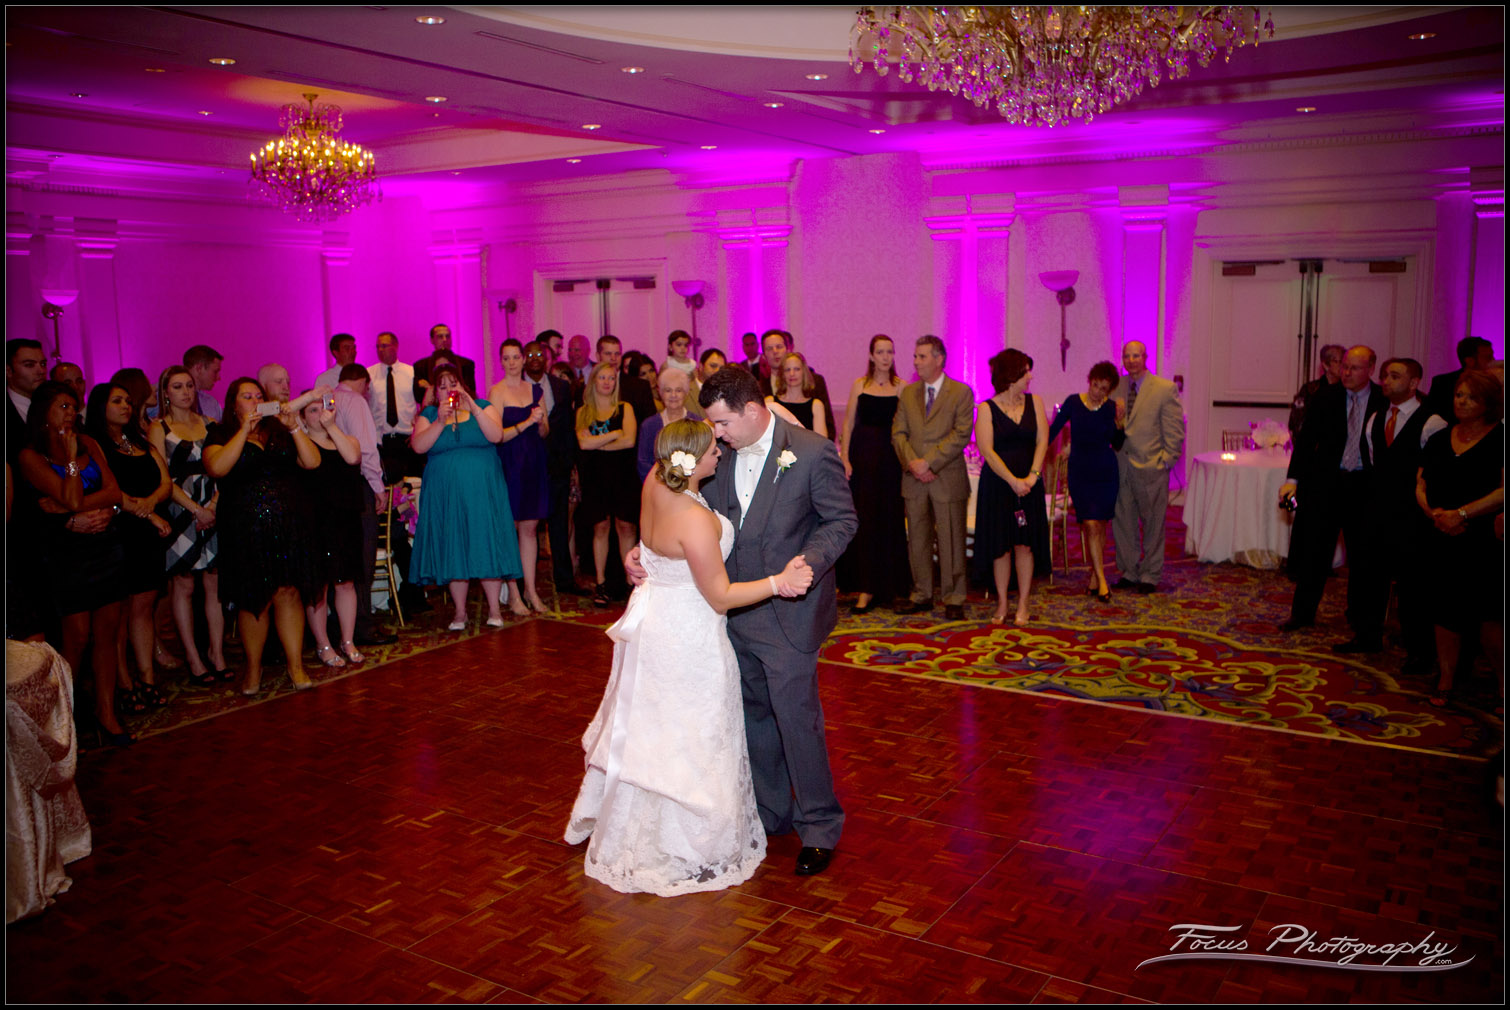 Bride and Groom Dancing in the Wentworth Ballroom